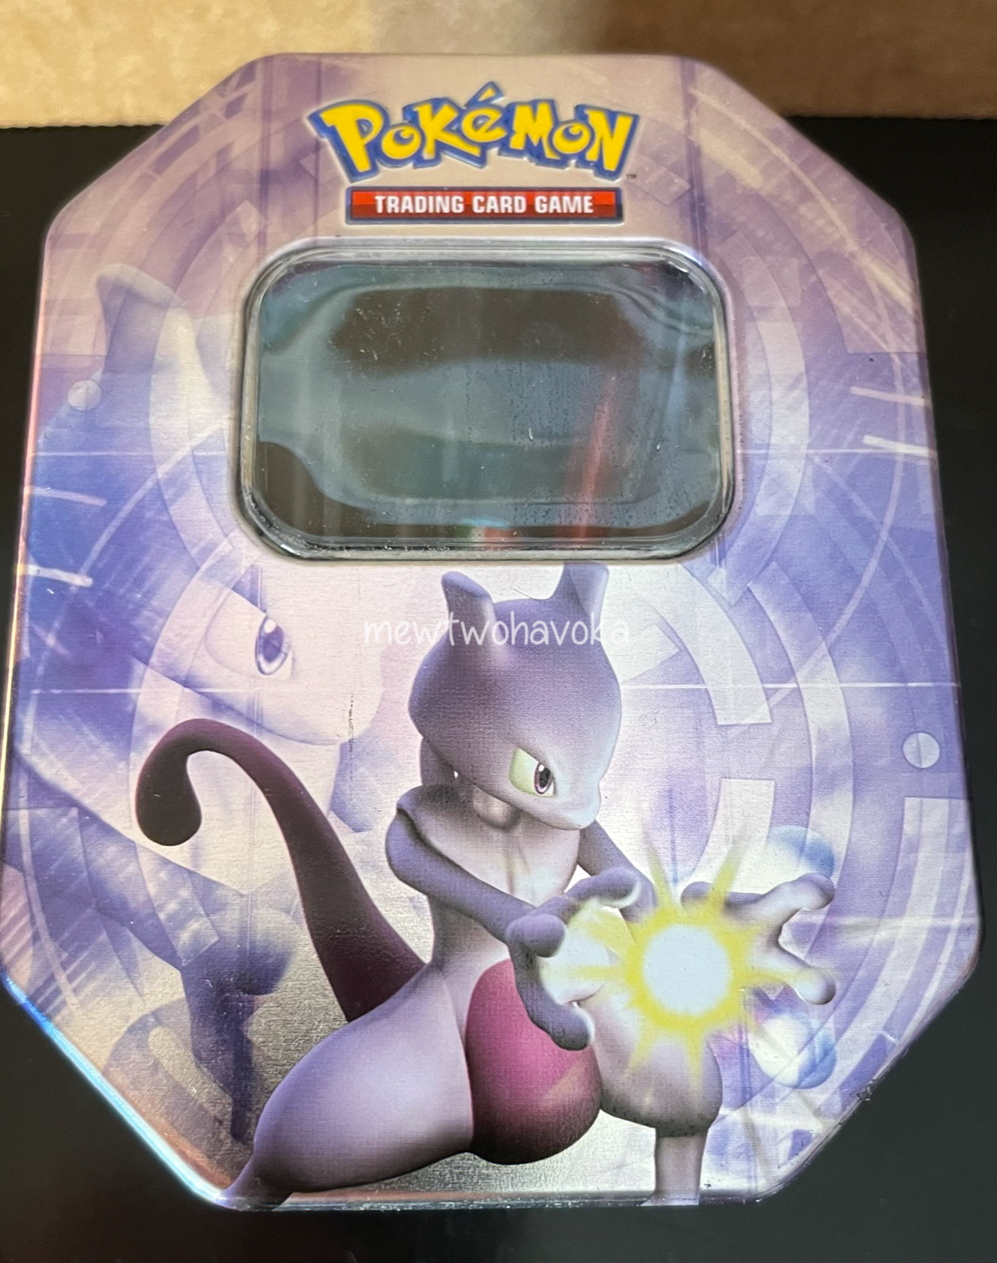 Pokémon: 10 Facts You Didn't Know About Mewtwo